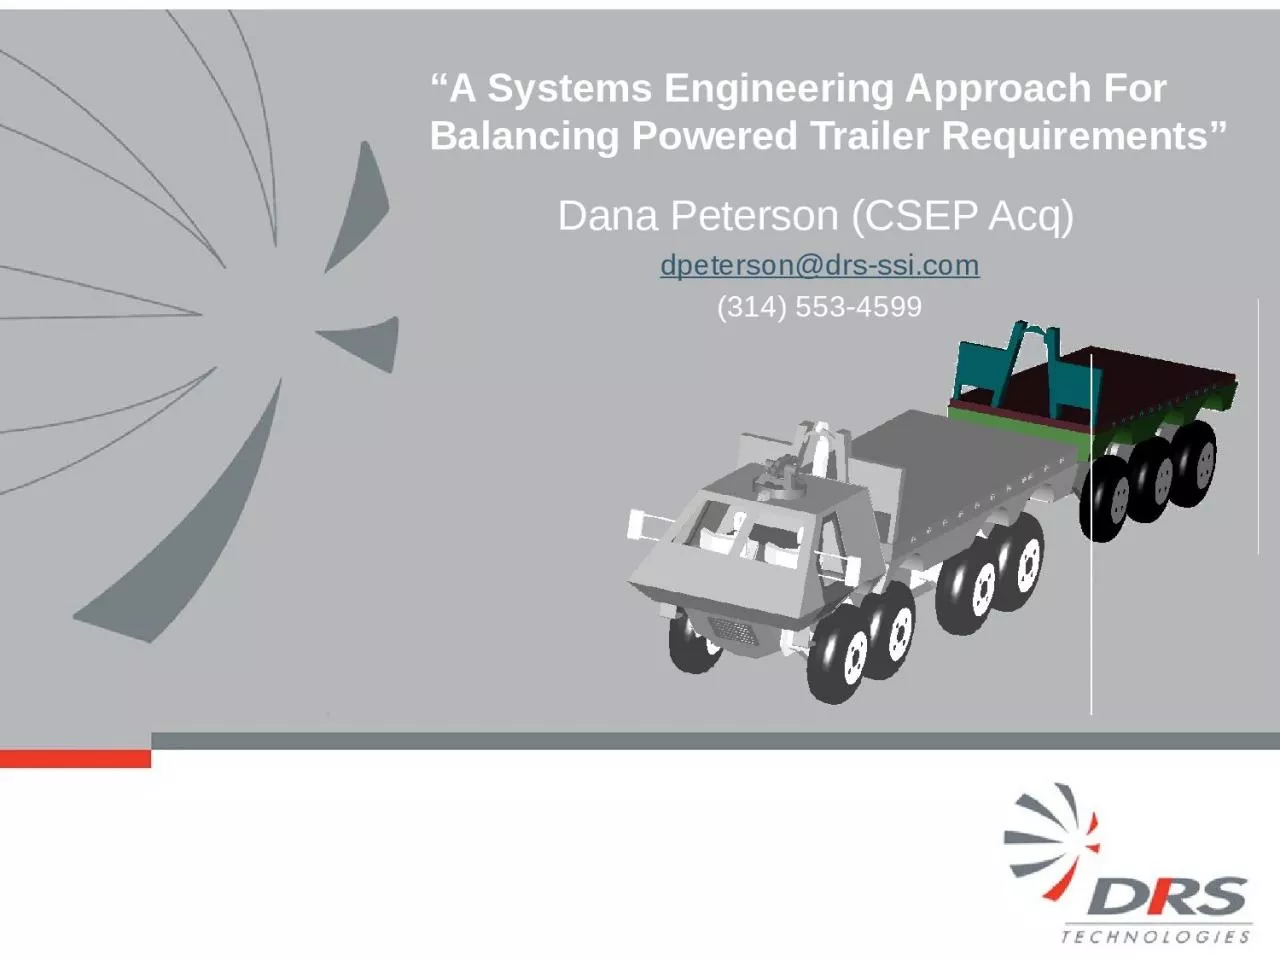 “A Systems Engineering Approach For Balancing Powered Trailer Requirements”